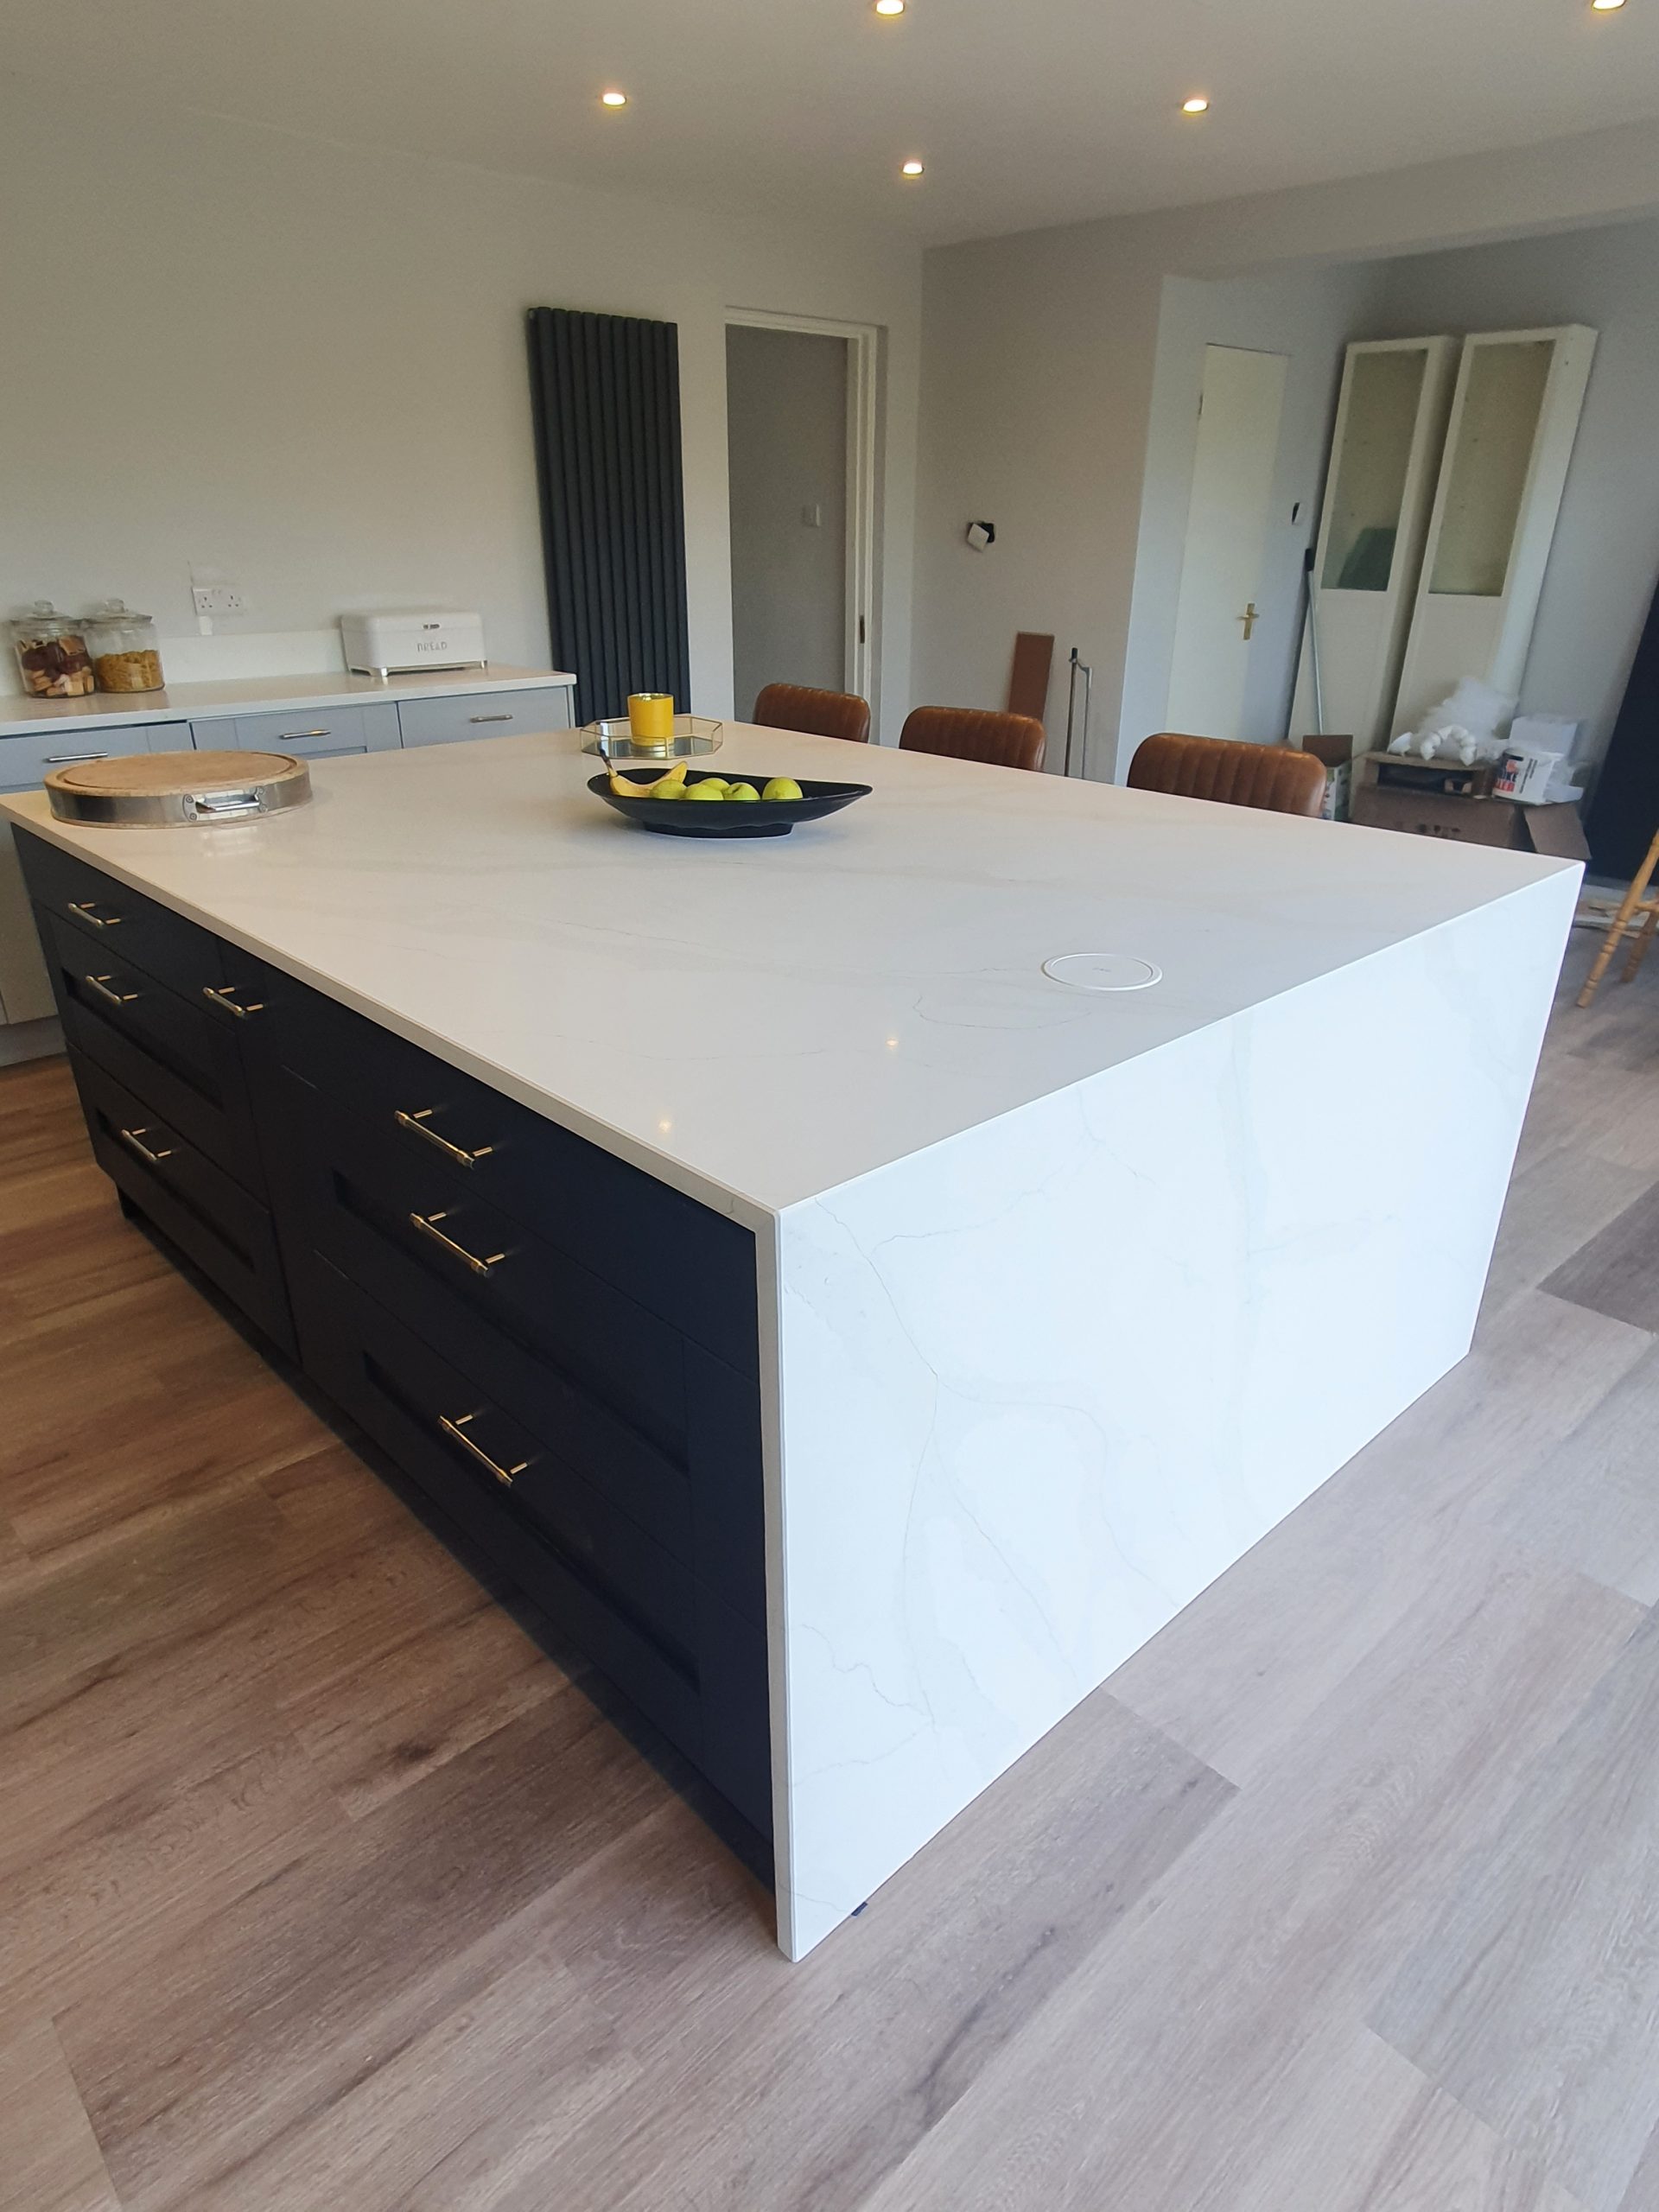 booked matched worktop